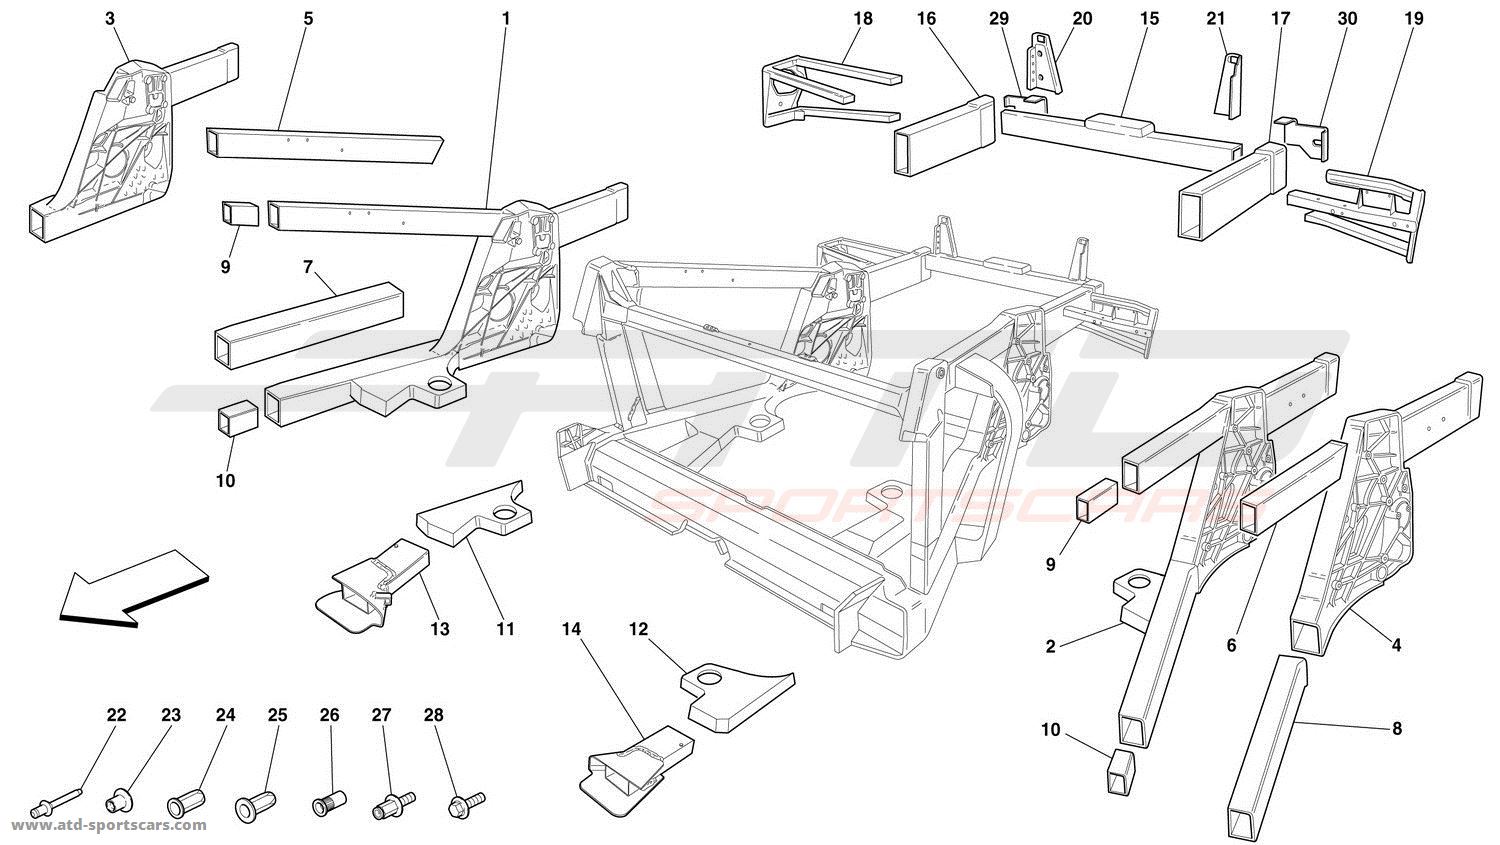 FRAME - REAR ELEMENTS SUB-GROUPS